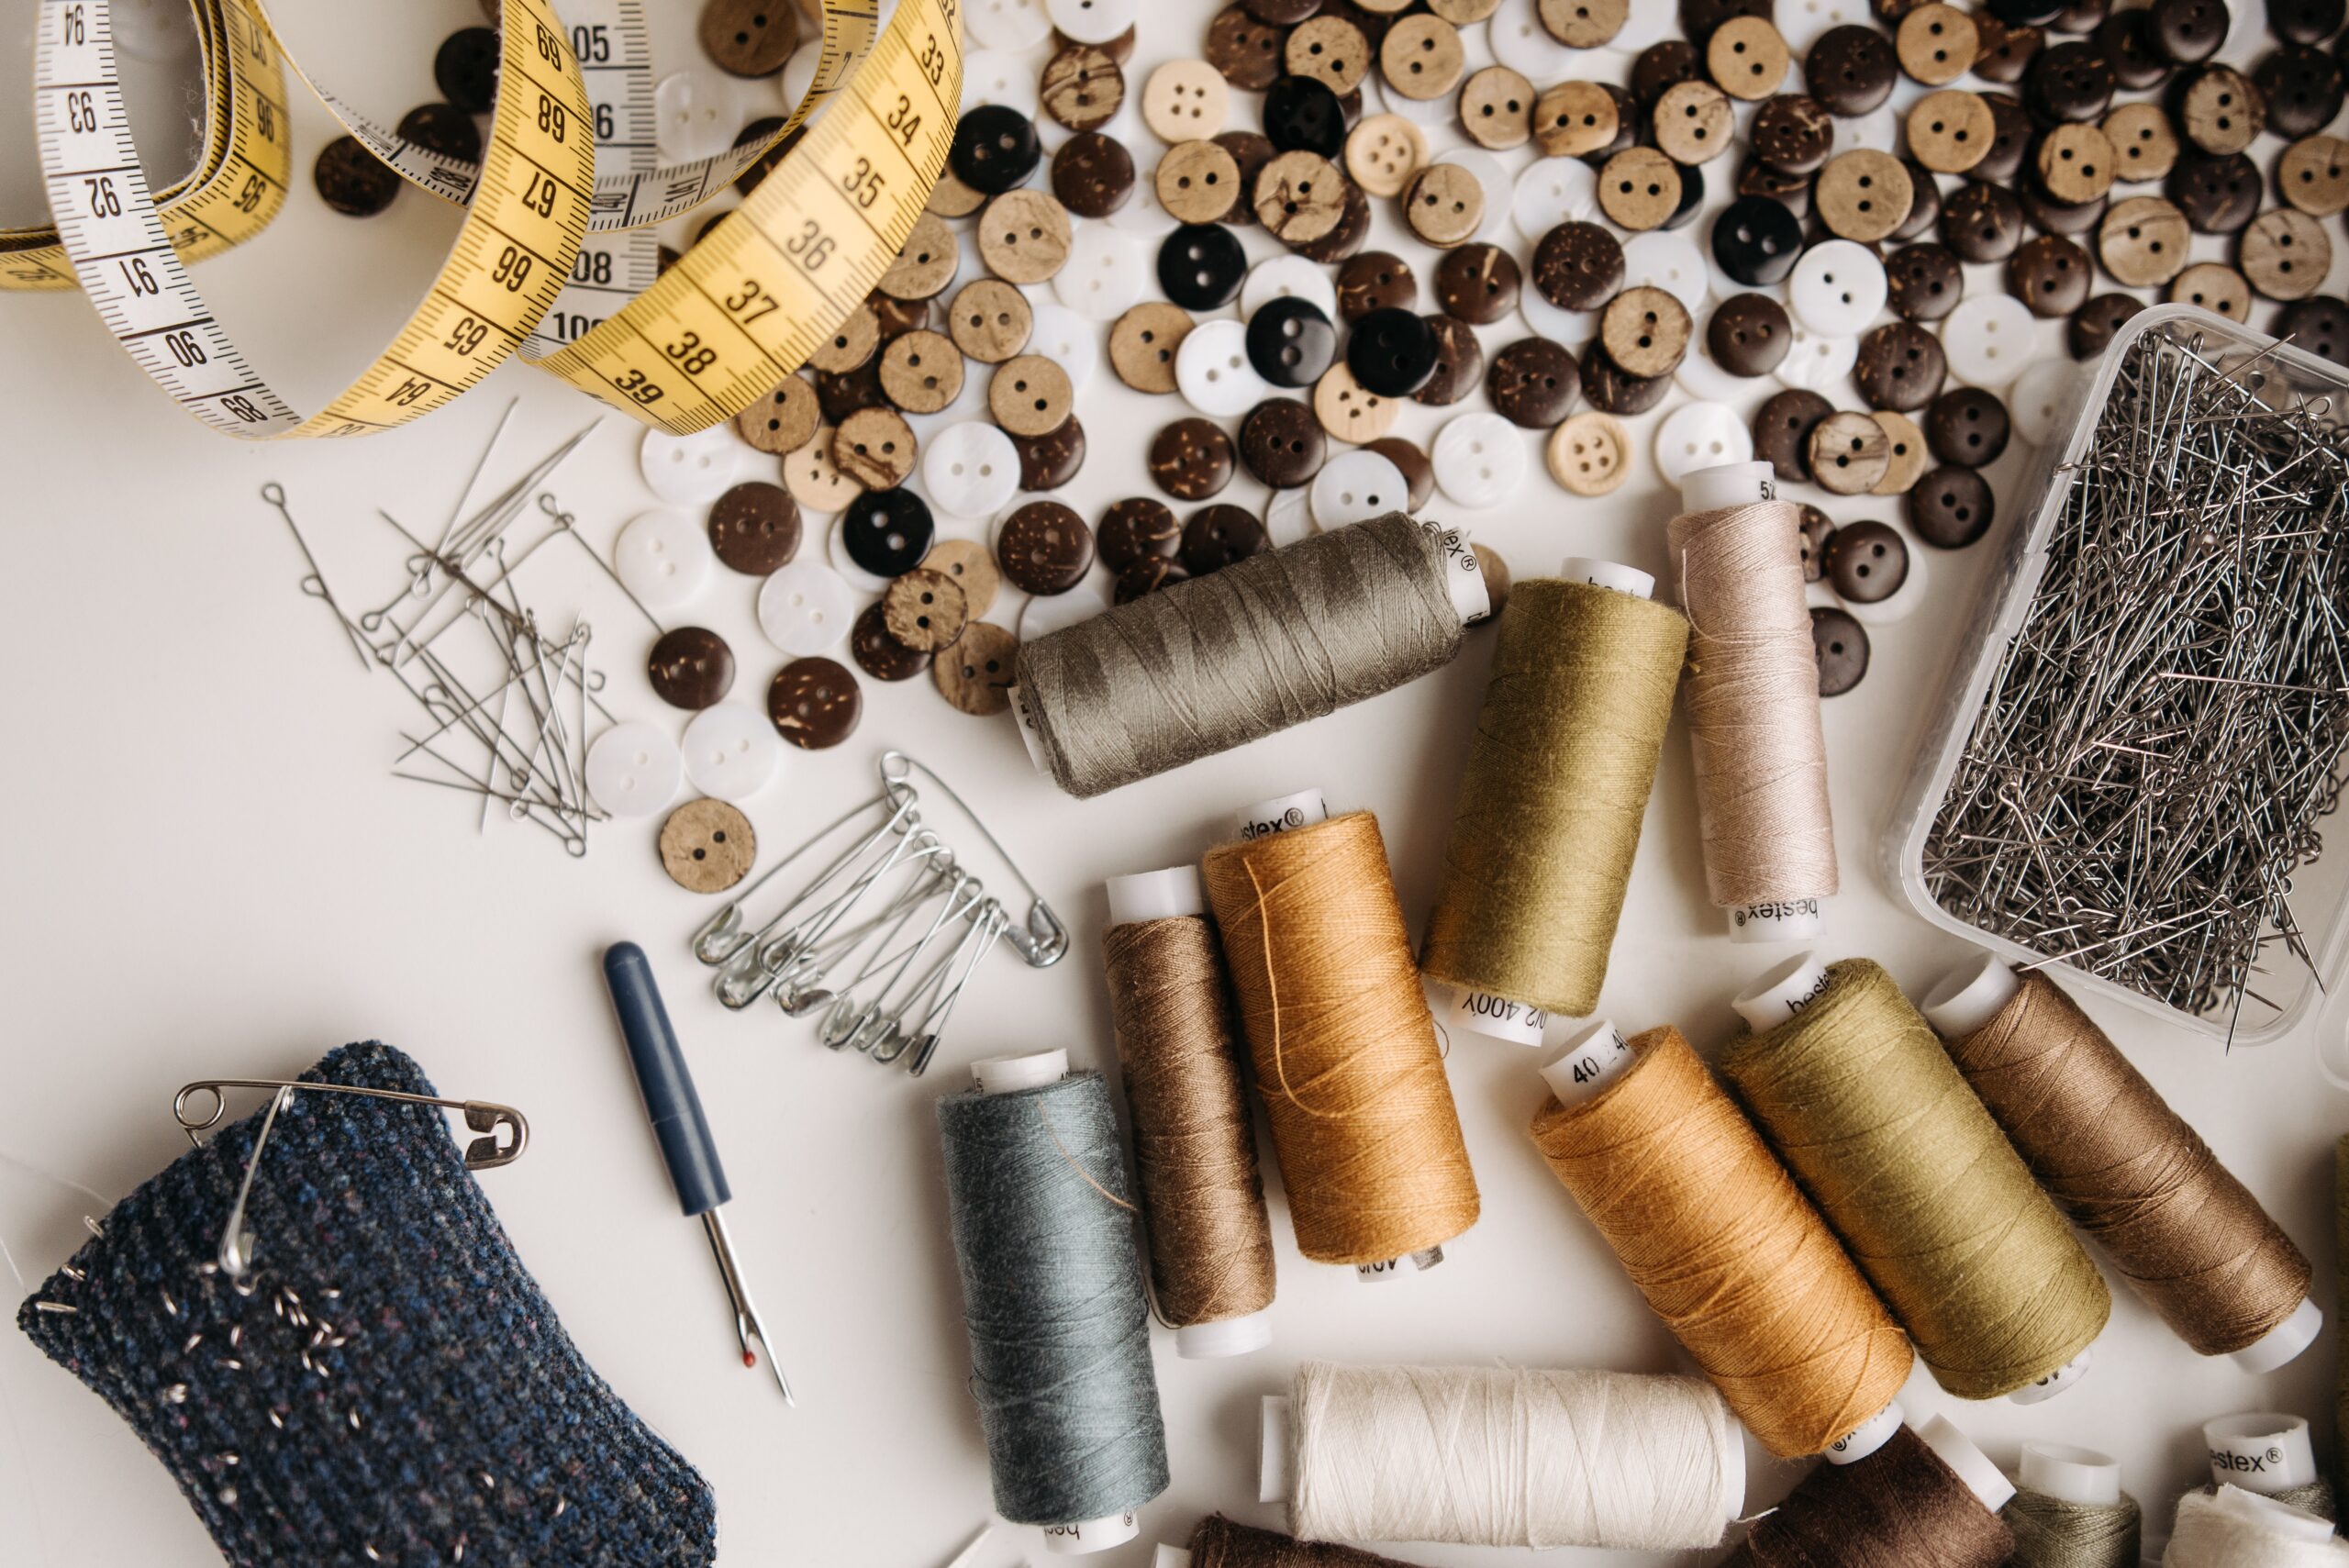 Buttons and sewing threads on the table